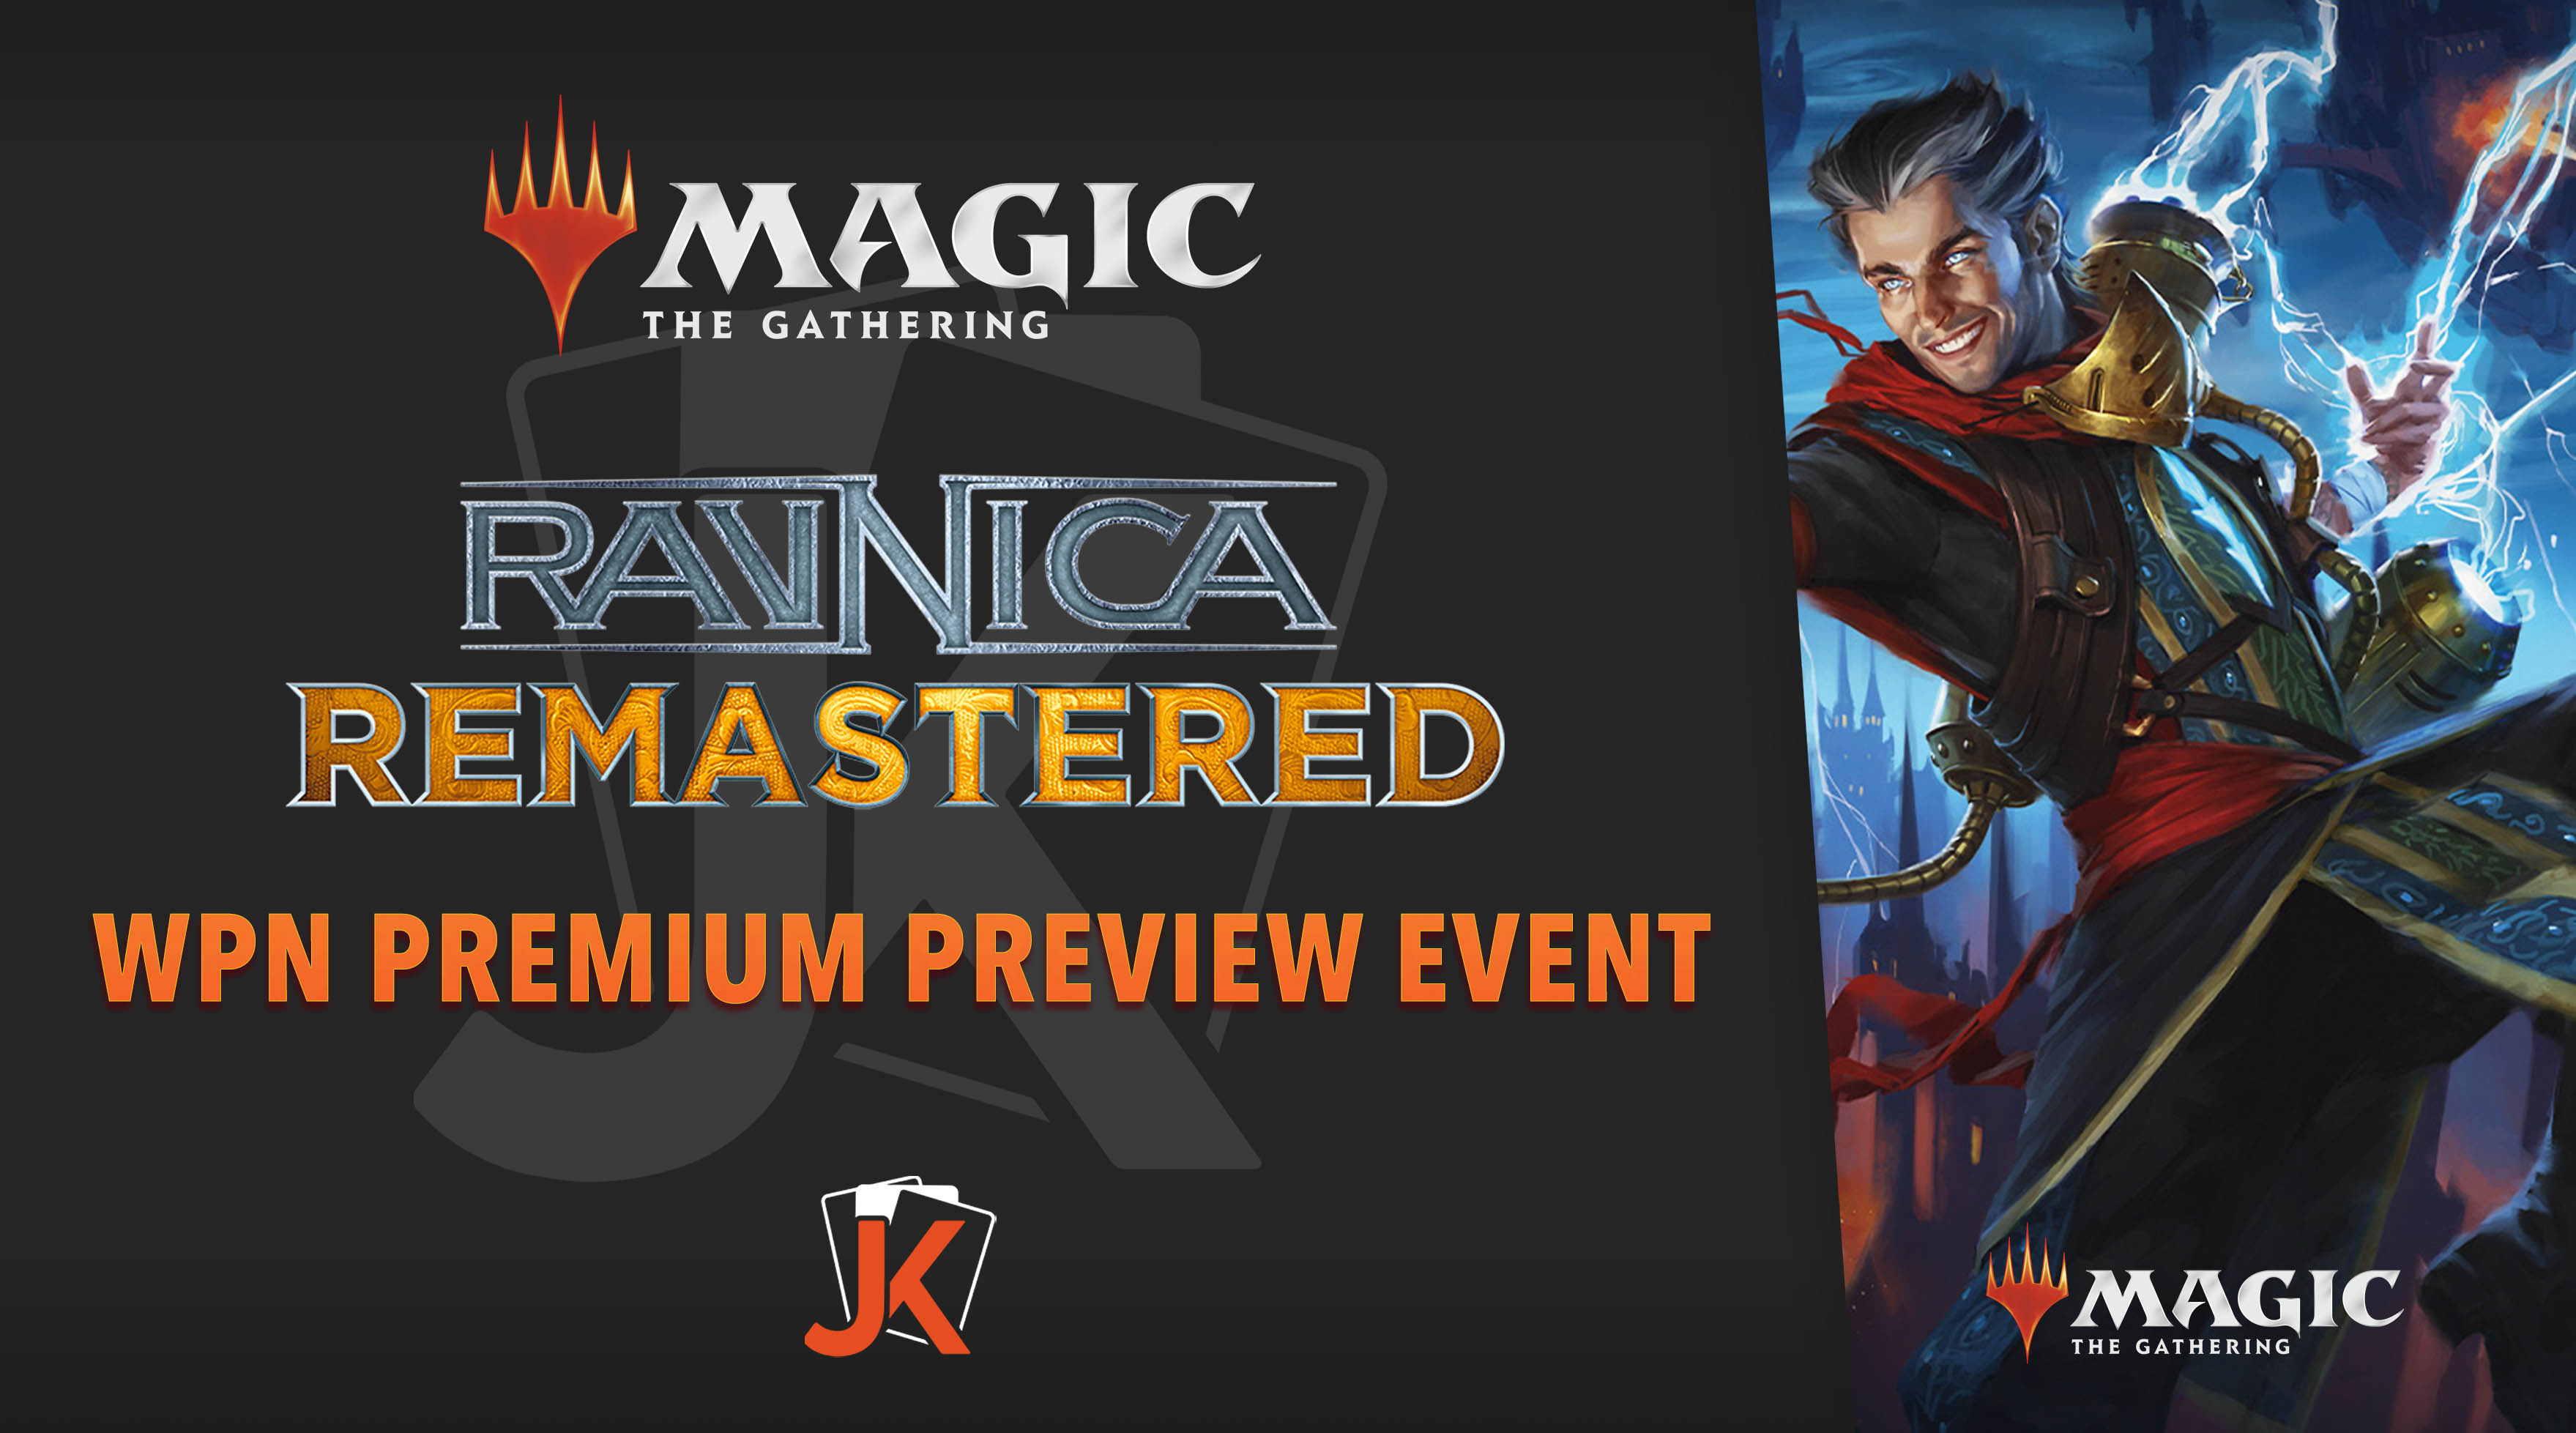 Ravnica Remastered Preview Event - Boosterdraft 